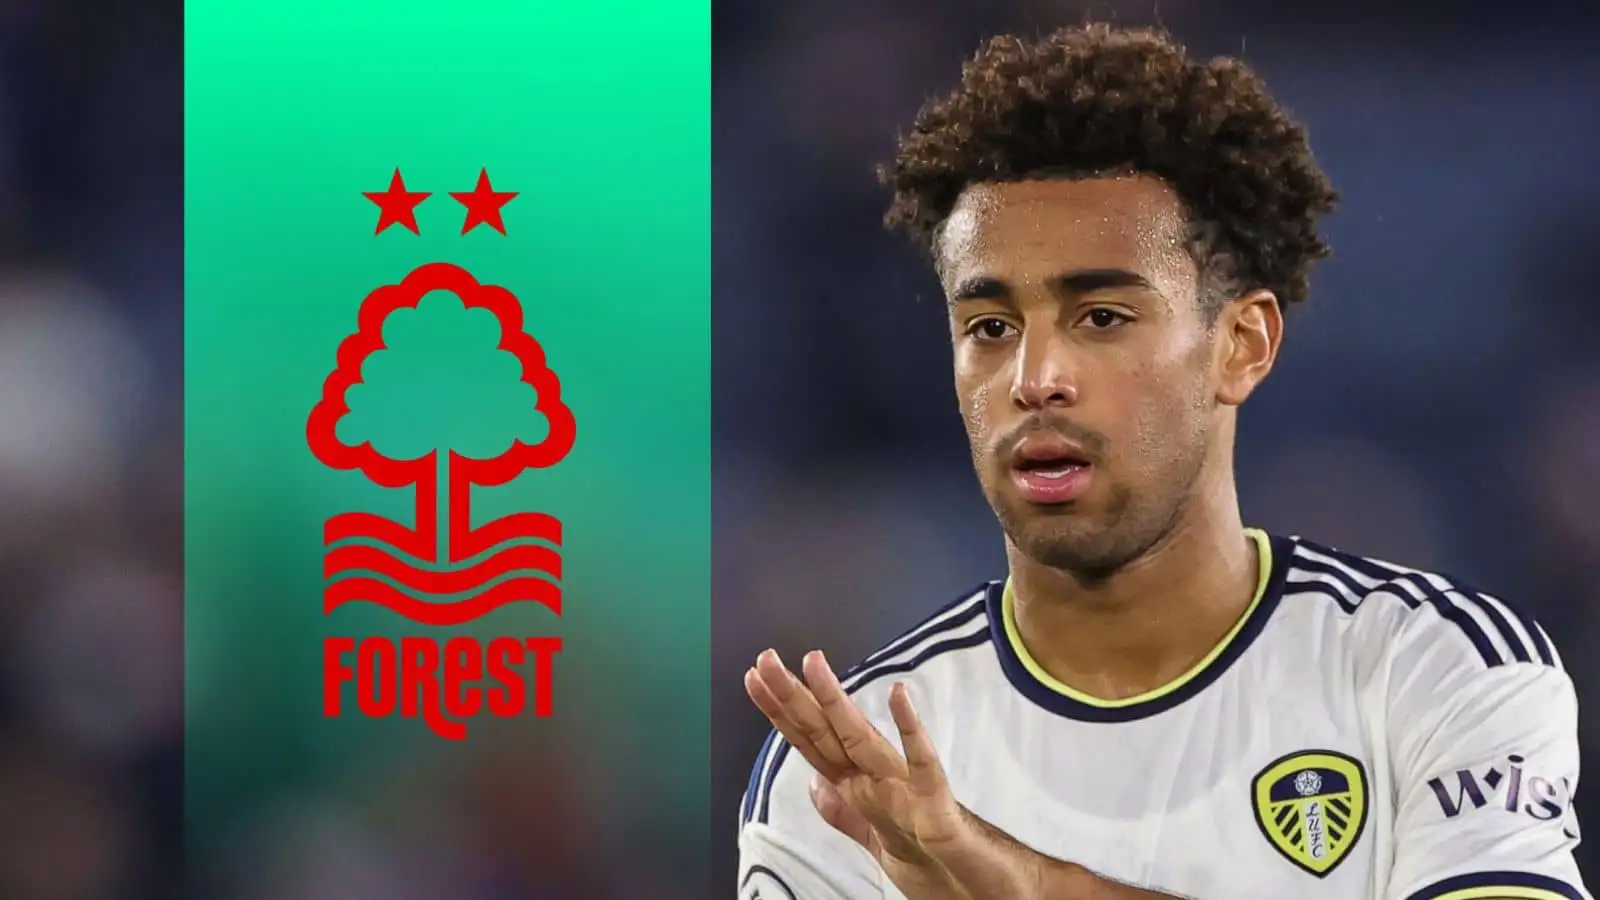 Leeds Utd’s best player wanted by Nott’m Forest with stars of Man Utd, Chelsea lined up as part of six-man summer wishlist